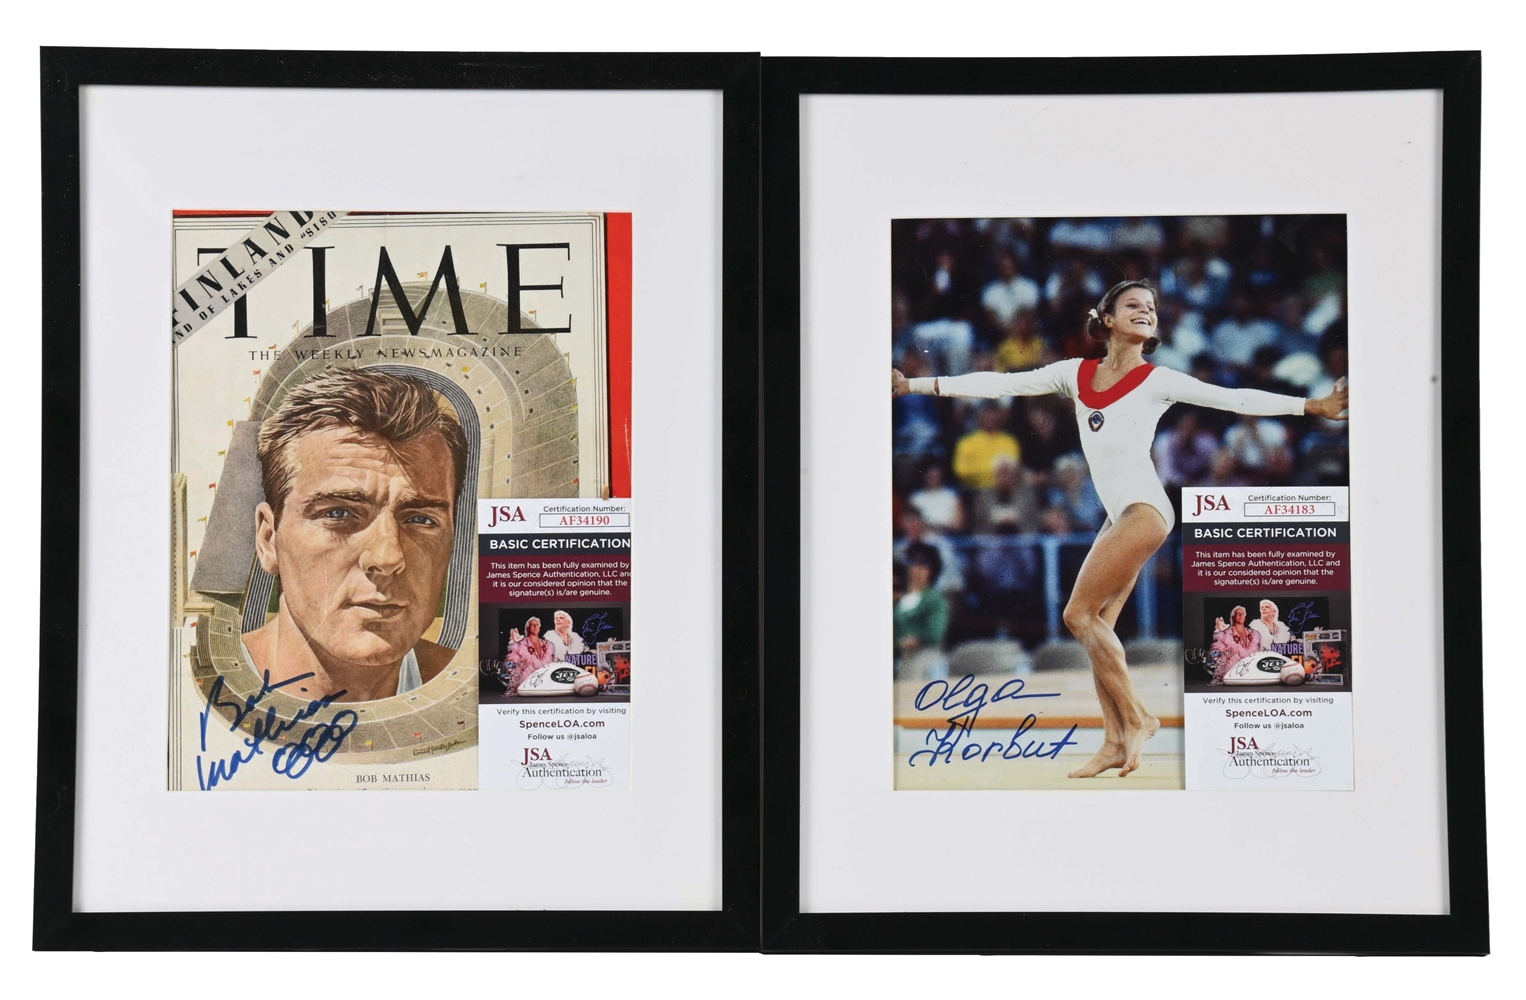 LOT OF 2: AUTOGRAPHED OLYMPIC GOLD MEDALIST ITEMS.